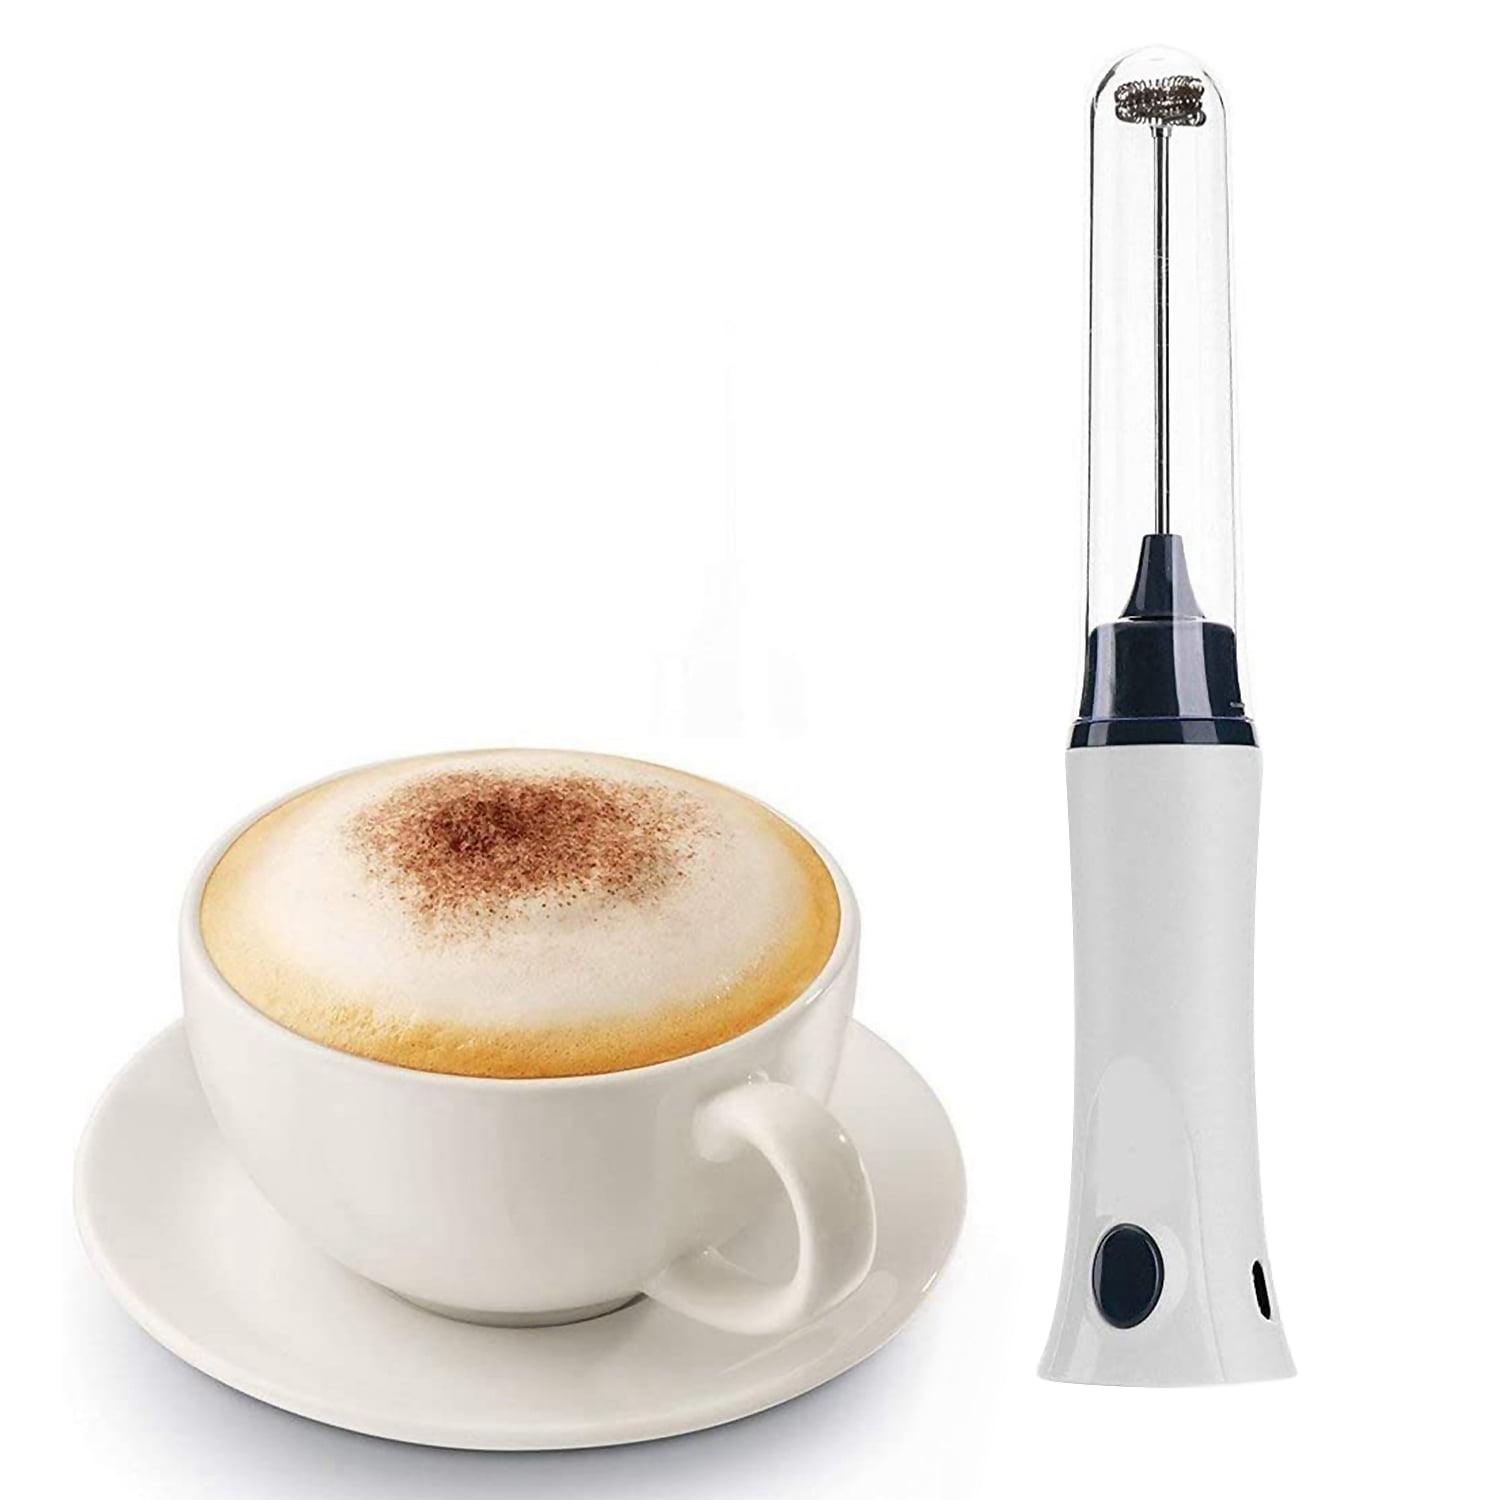 Diktook Electric Milk Frother Handheld Foam Maker for Coffee Latte Drink Mixer Whisk White, Size: 1XL